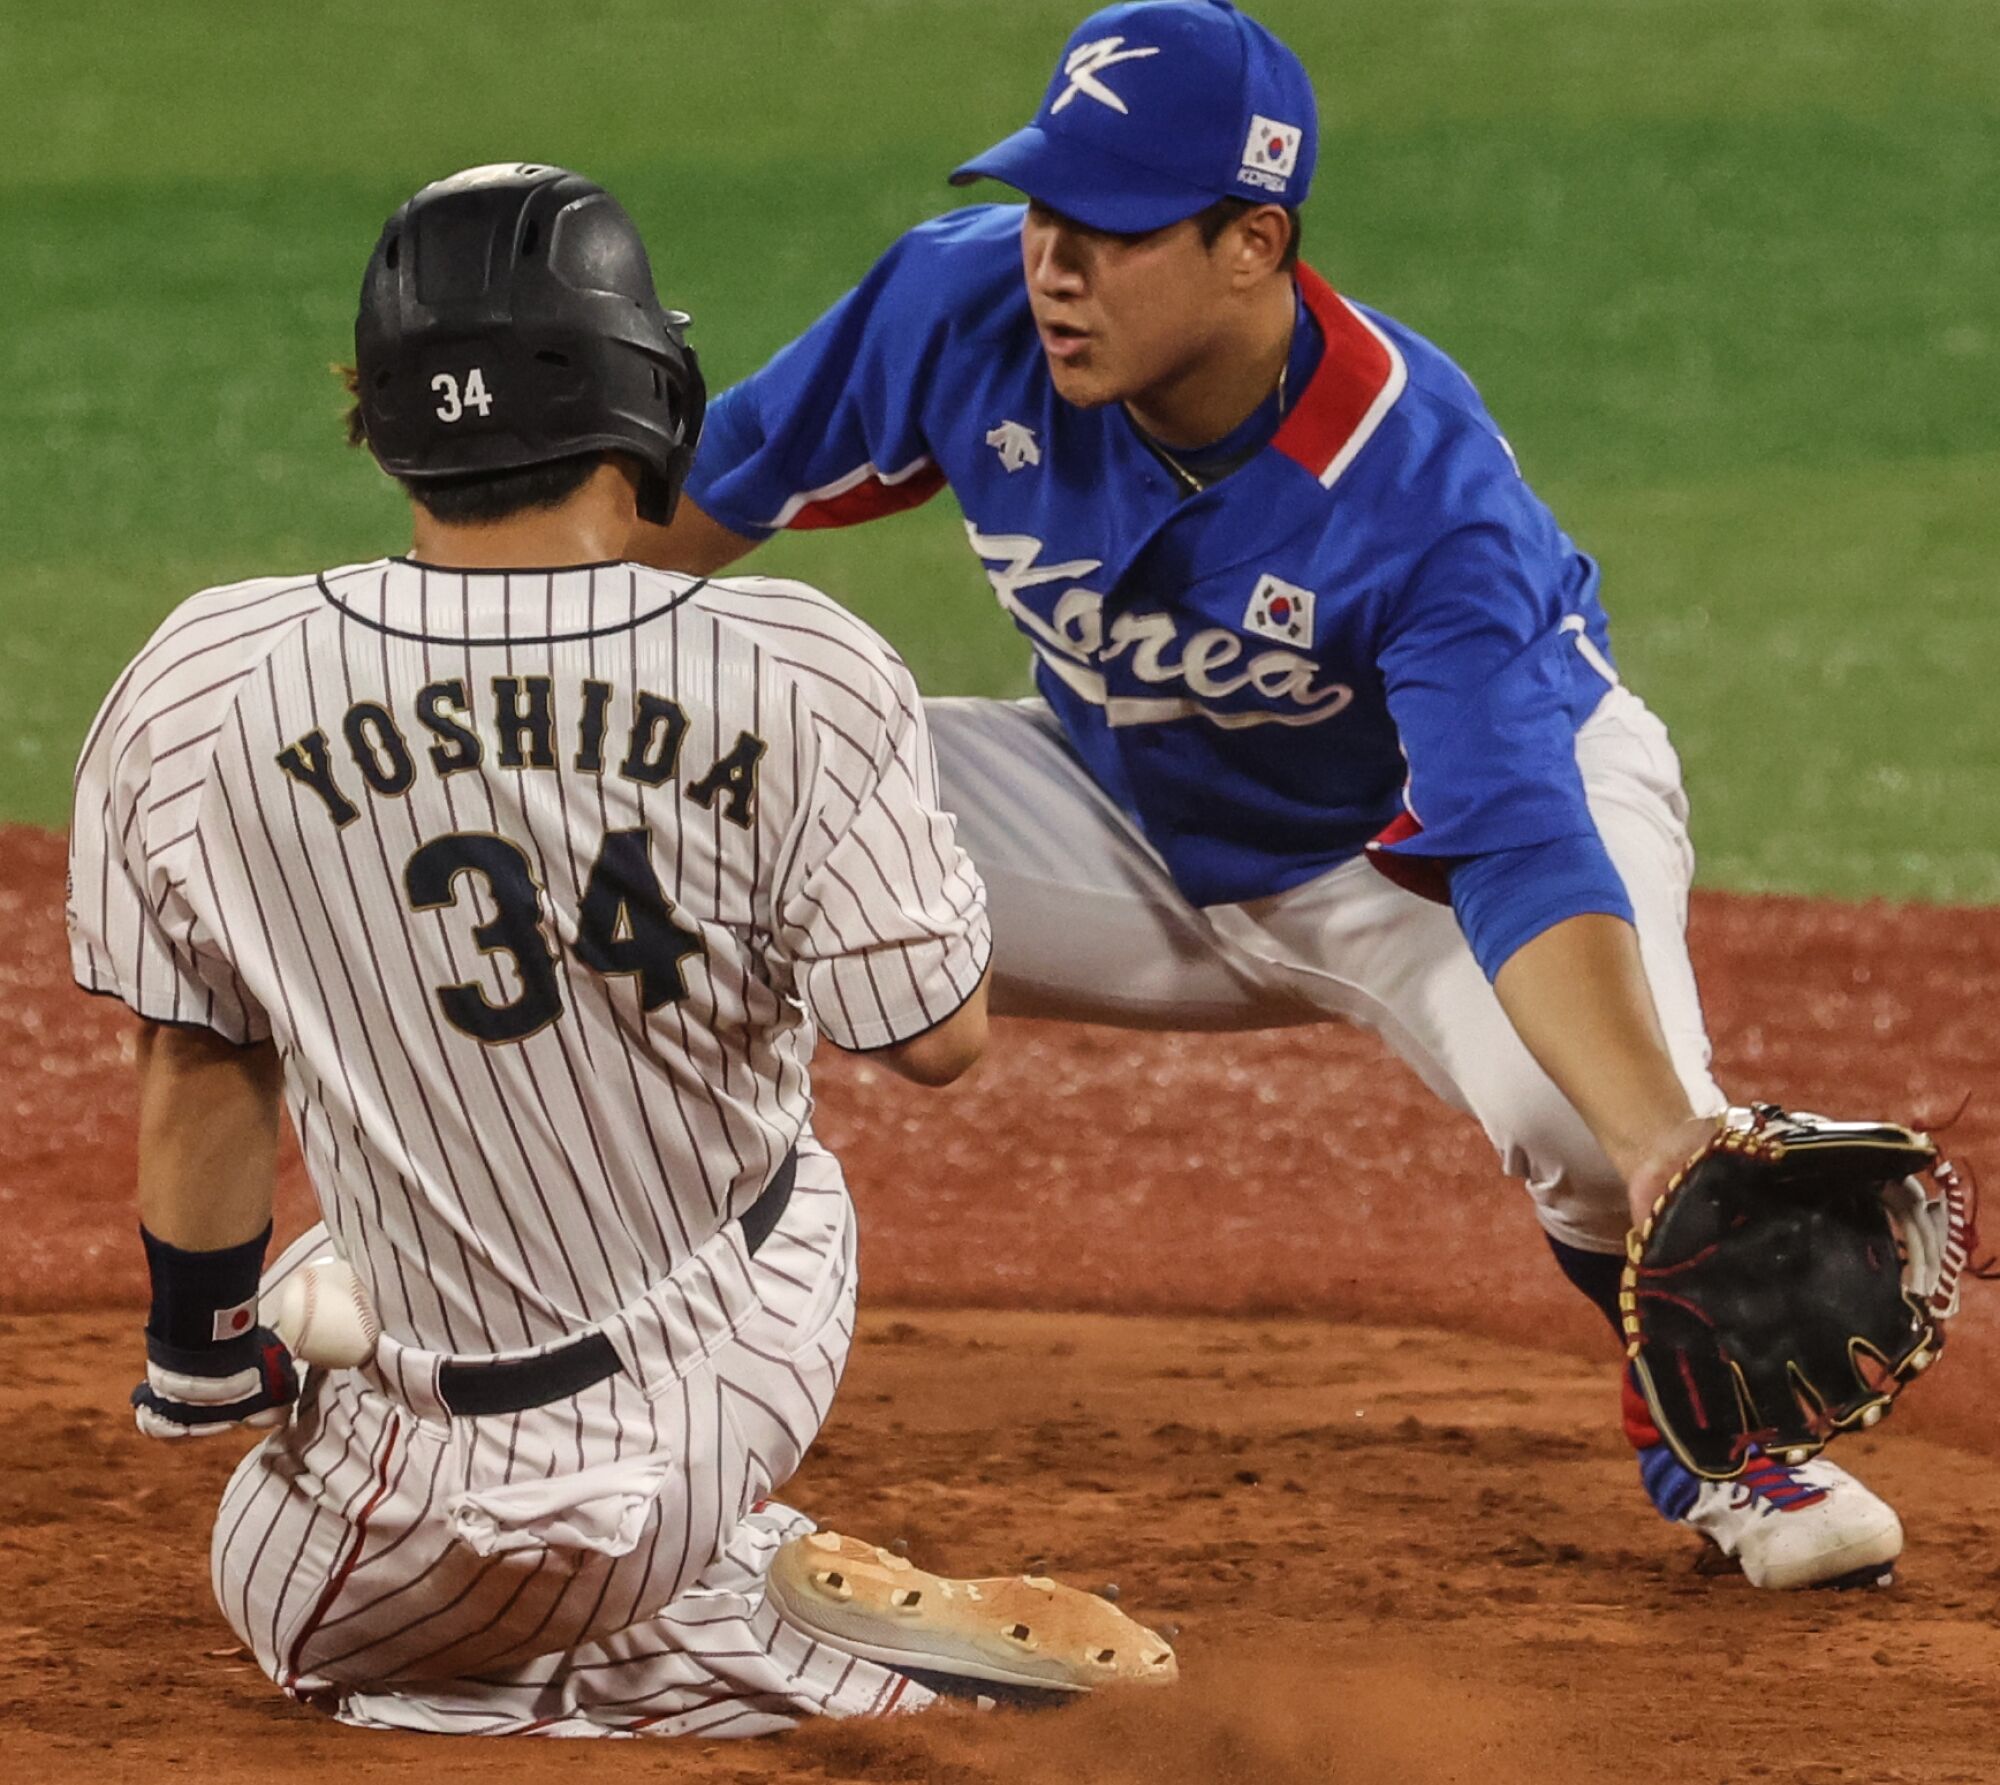 Japan's Masataka Yoshida is hit by the ball as he slides safely into second base in front of South Korea's Jaegyun Hwang.